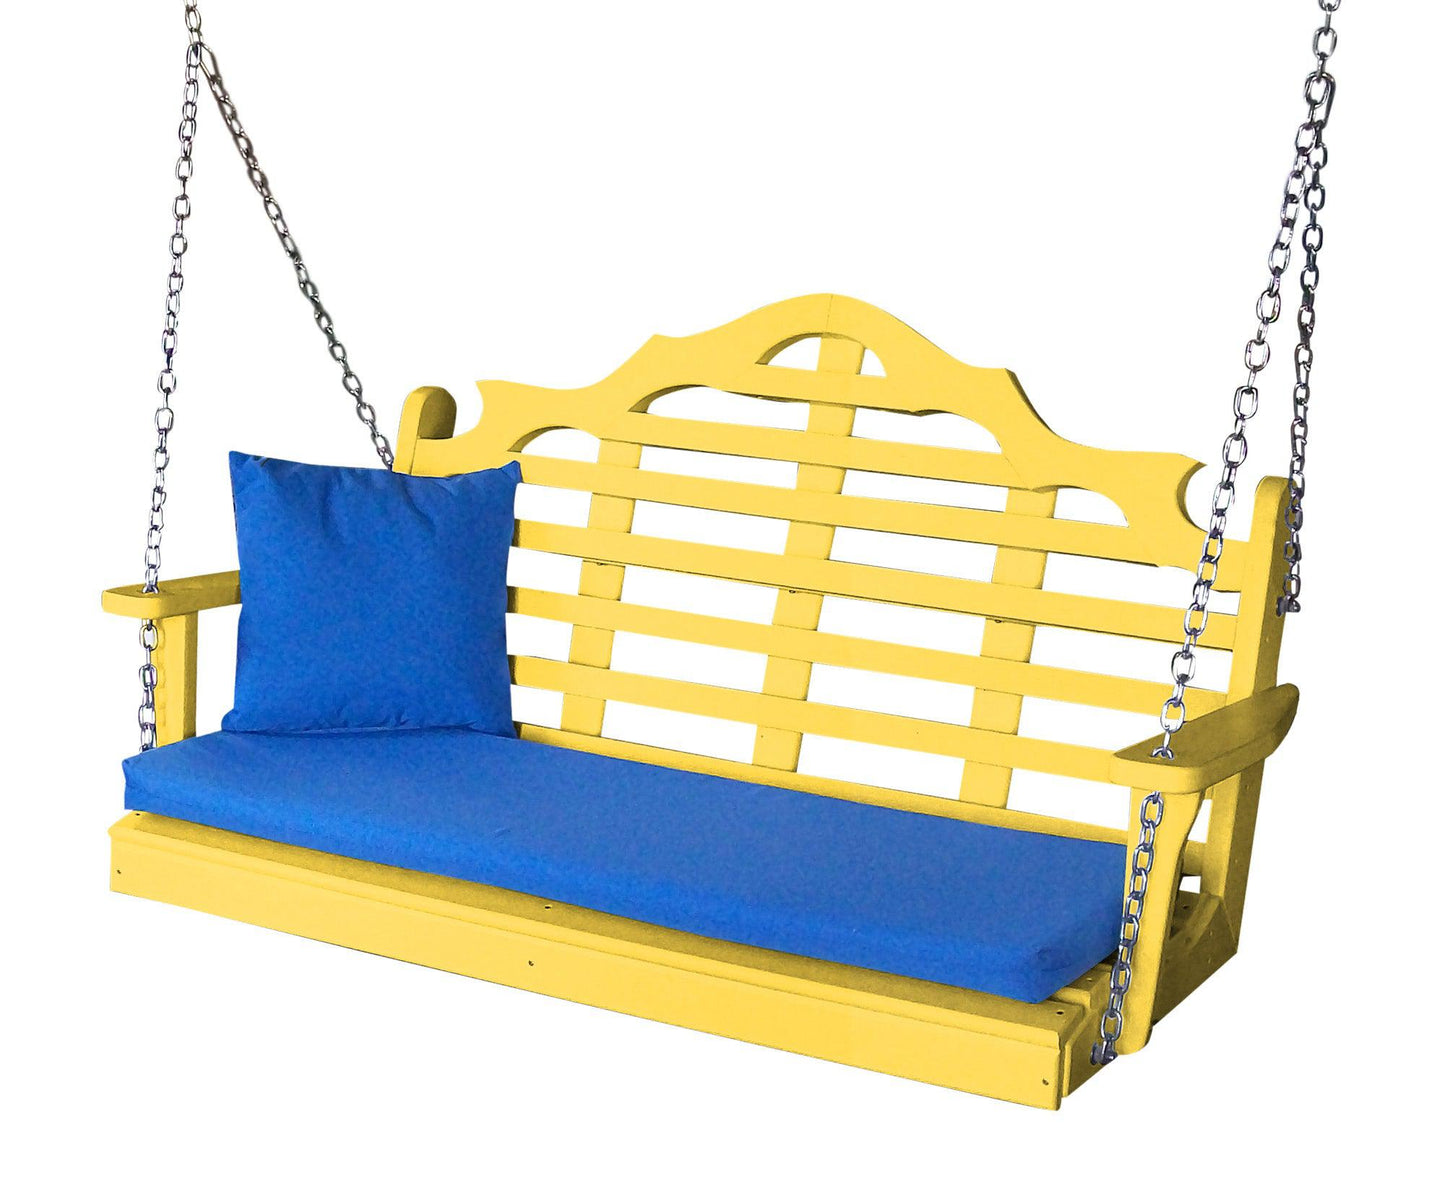 A&L Furniture Company Marlboro Recycled Plastic 4ft Porch Swing - LEAD TIME TO SHIP 10 BUSINESS DAYS